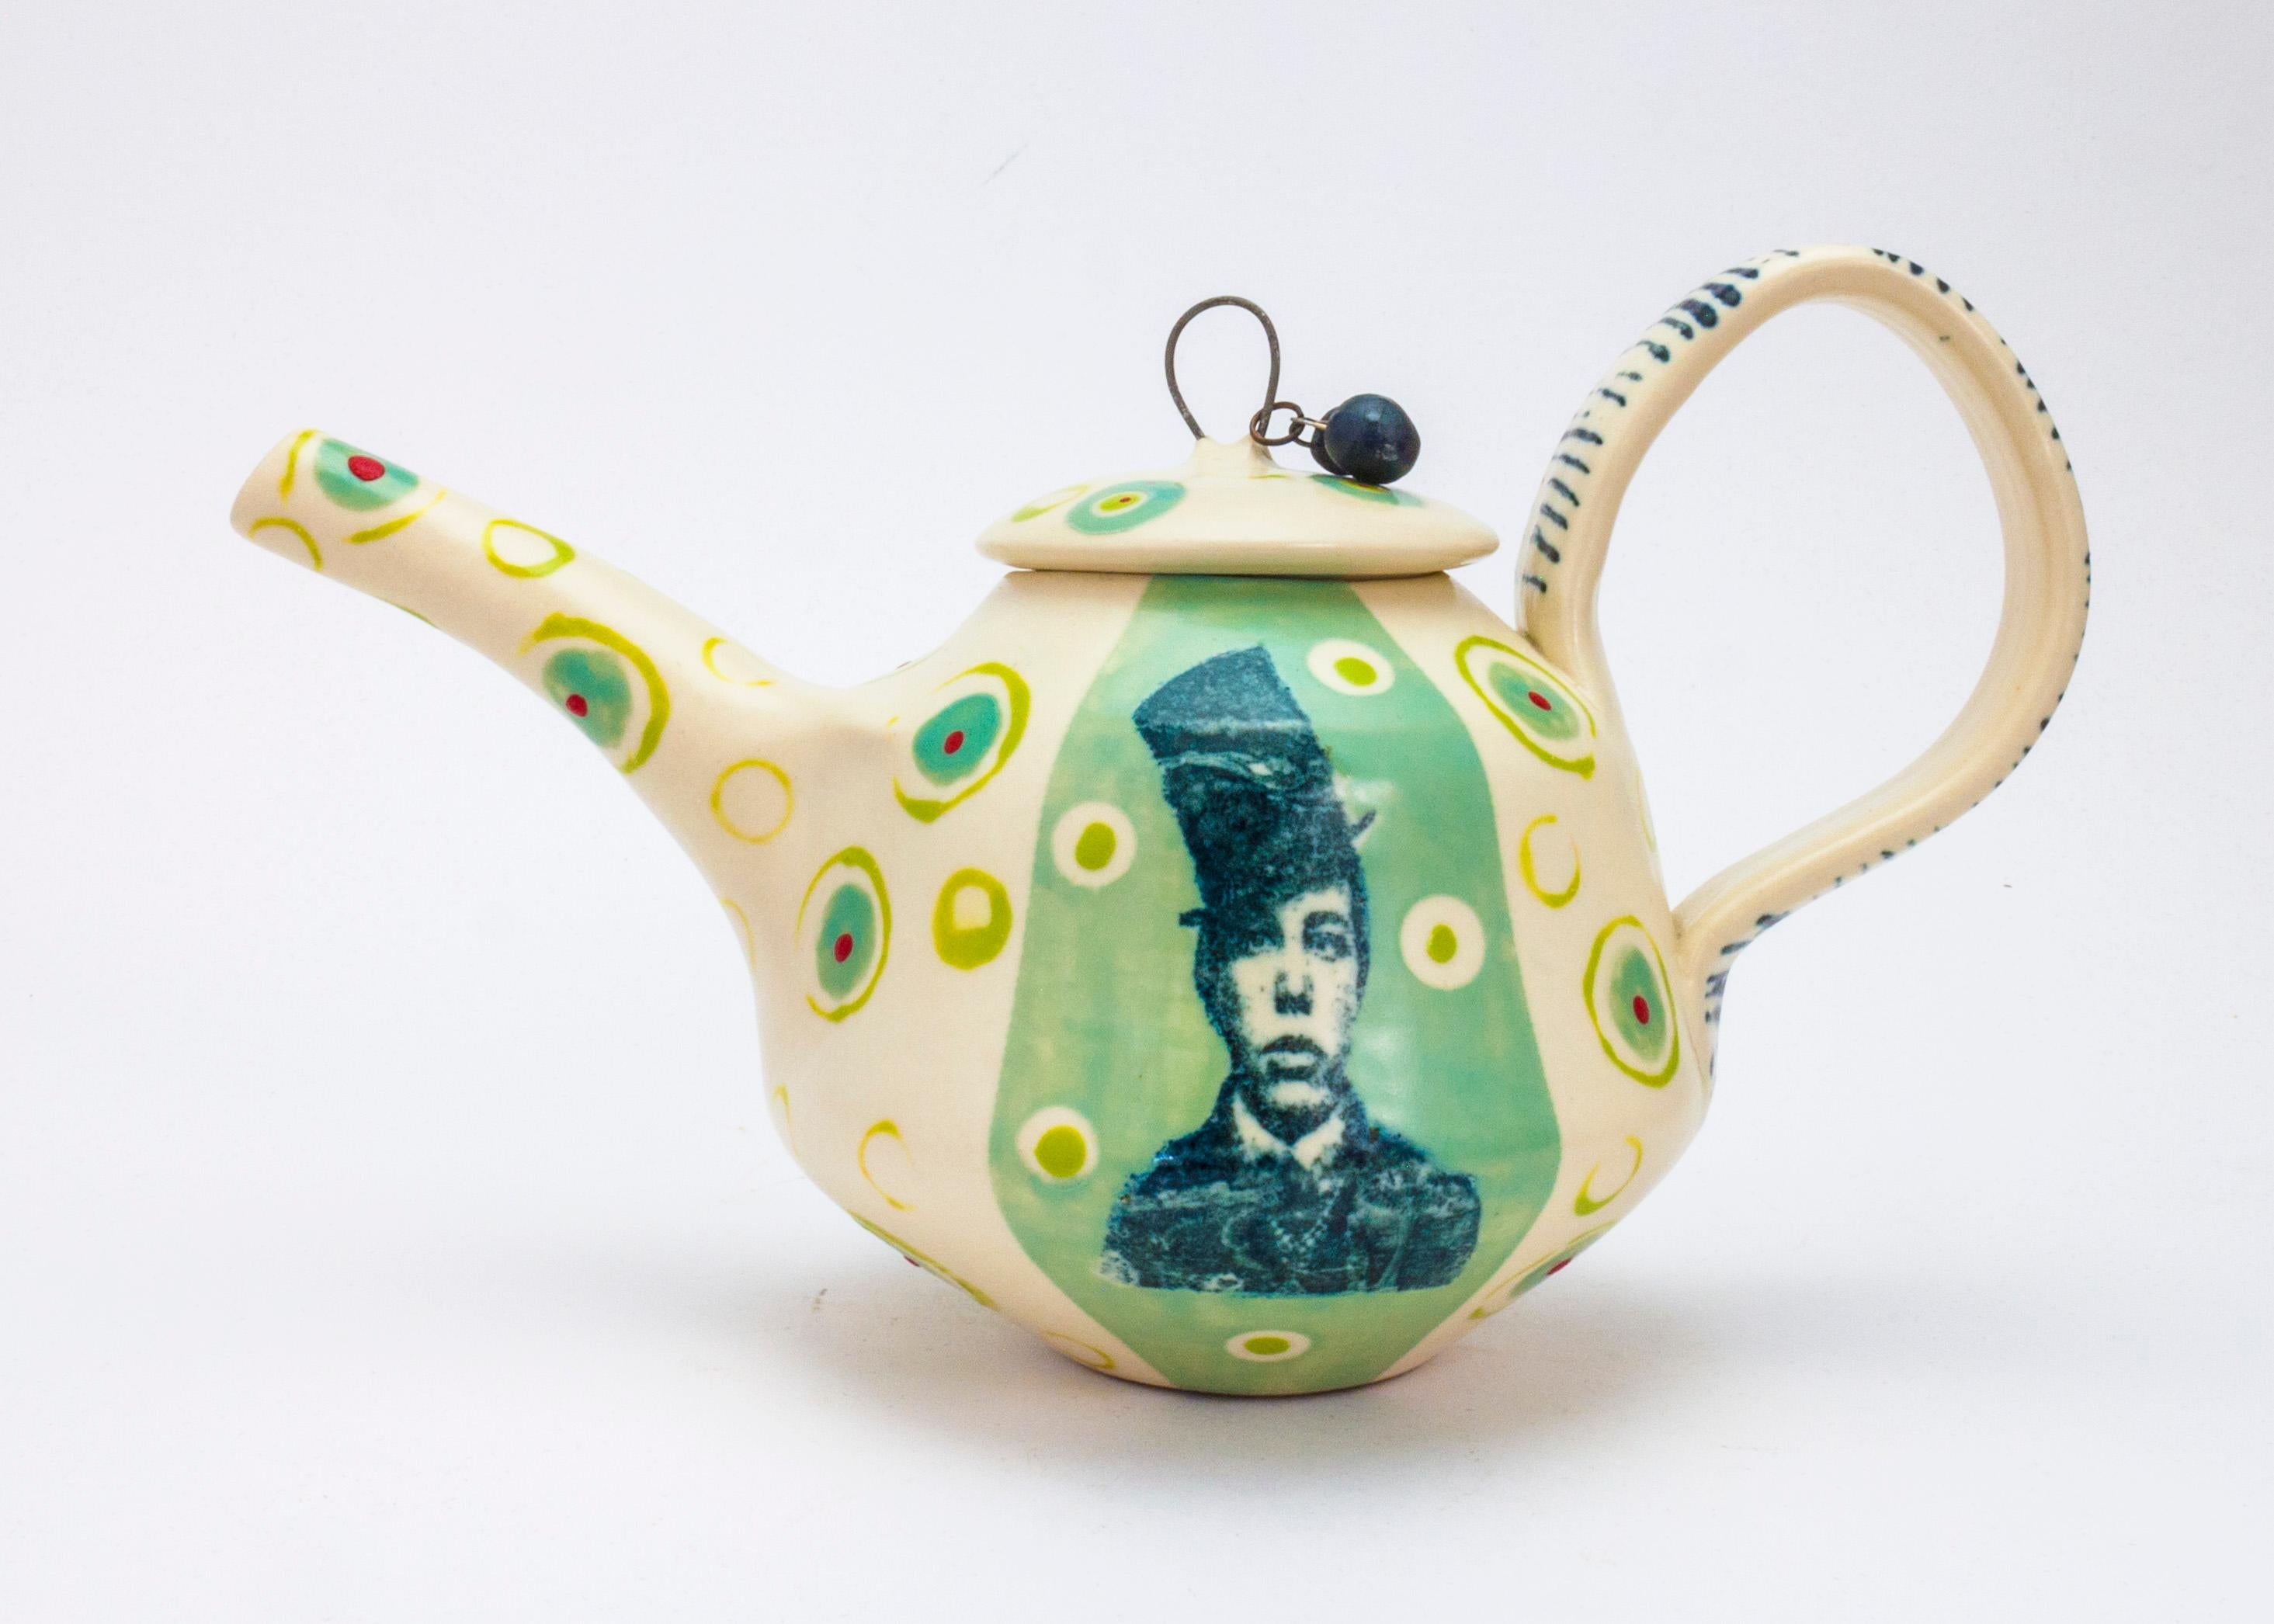 Theresa Robinson
Title: Lithograph printed Teapot with Stand 
Materials: Porcelain
Date: 2018
Dimensions: 5 X 9